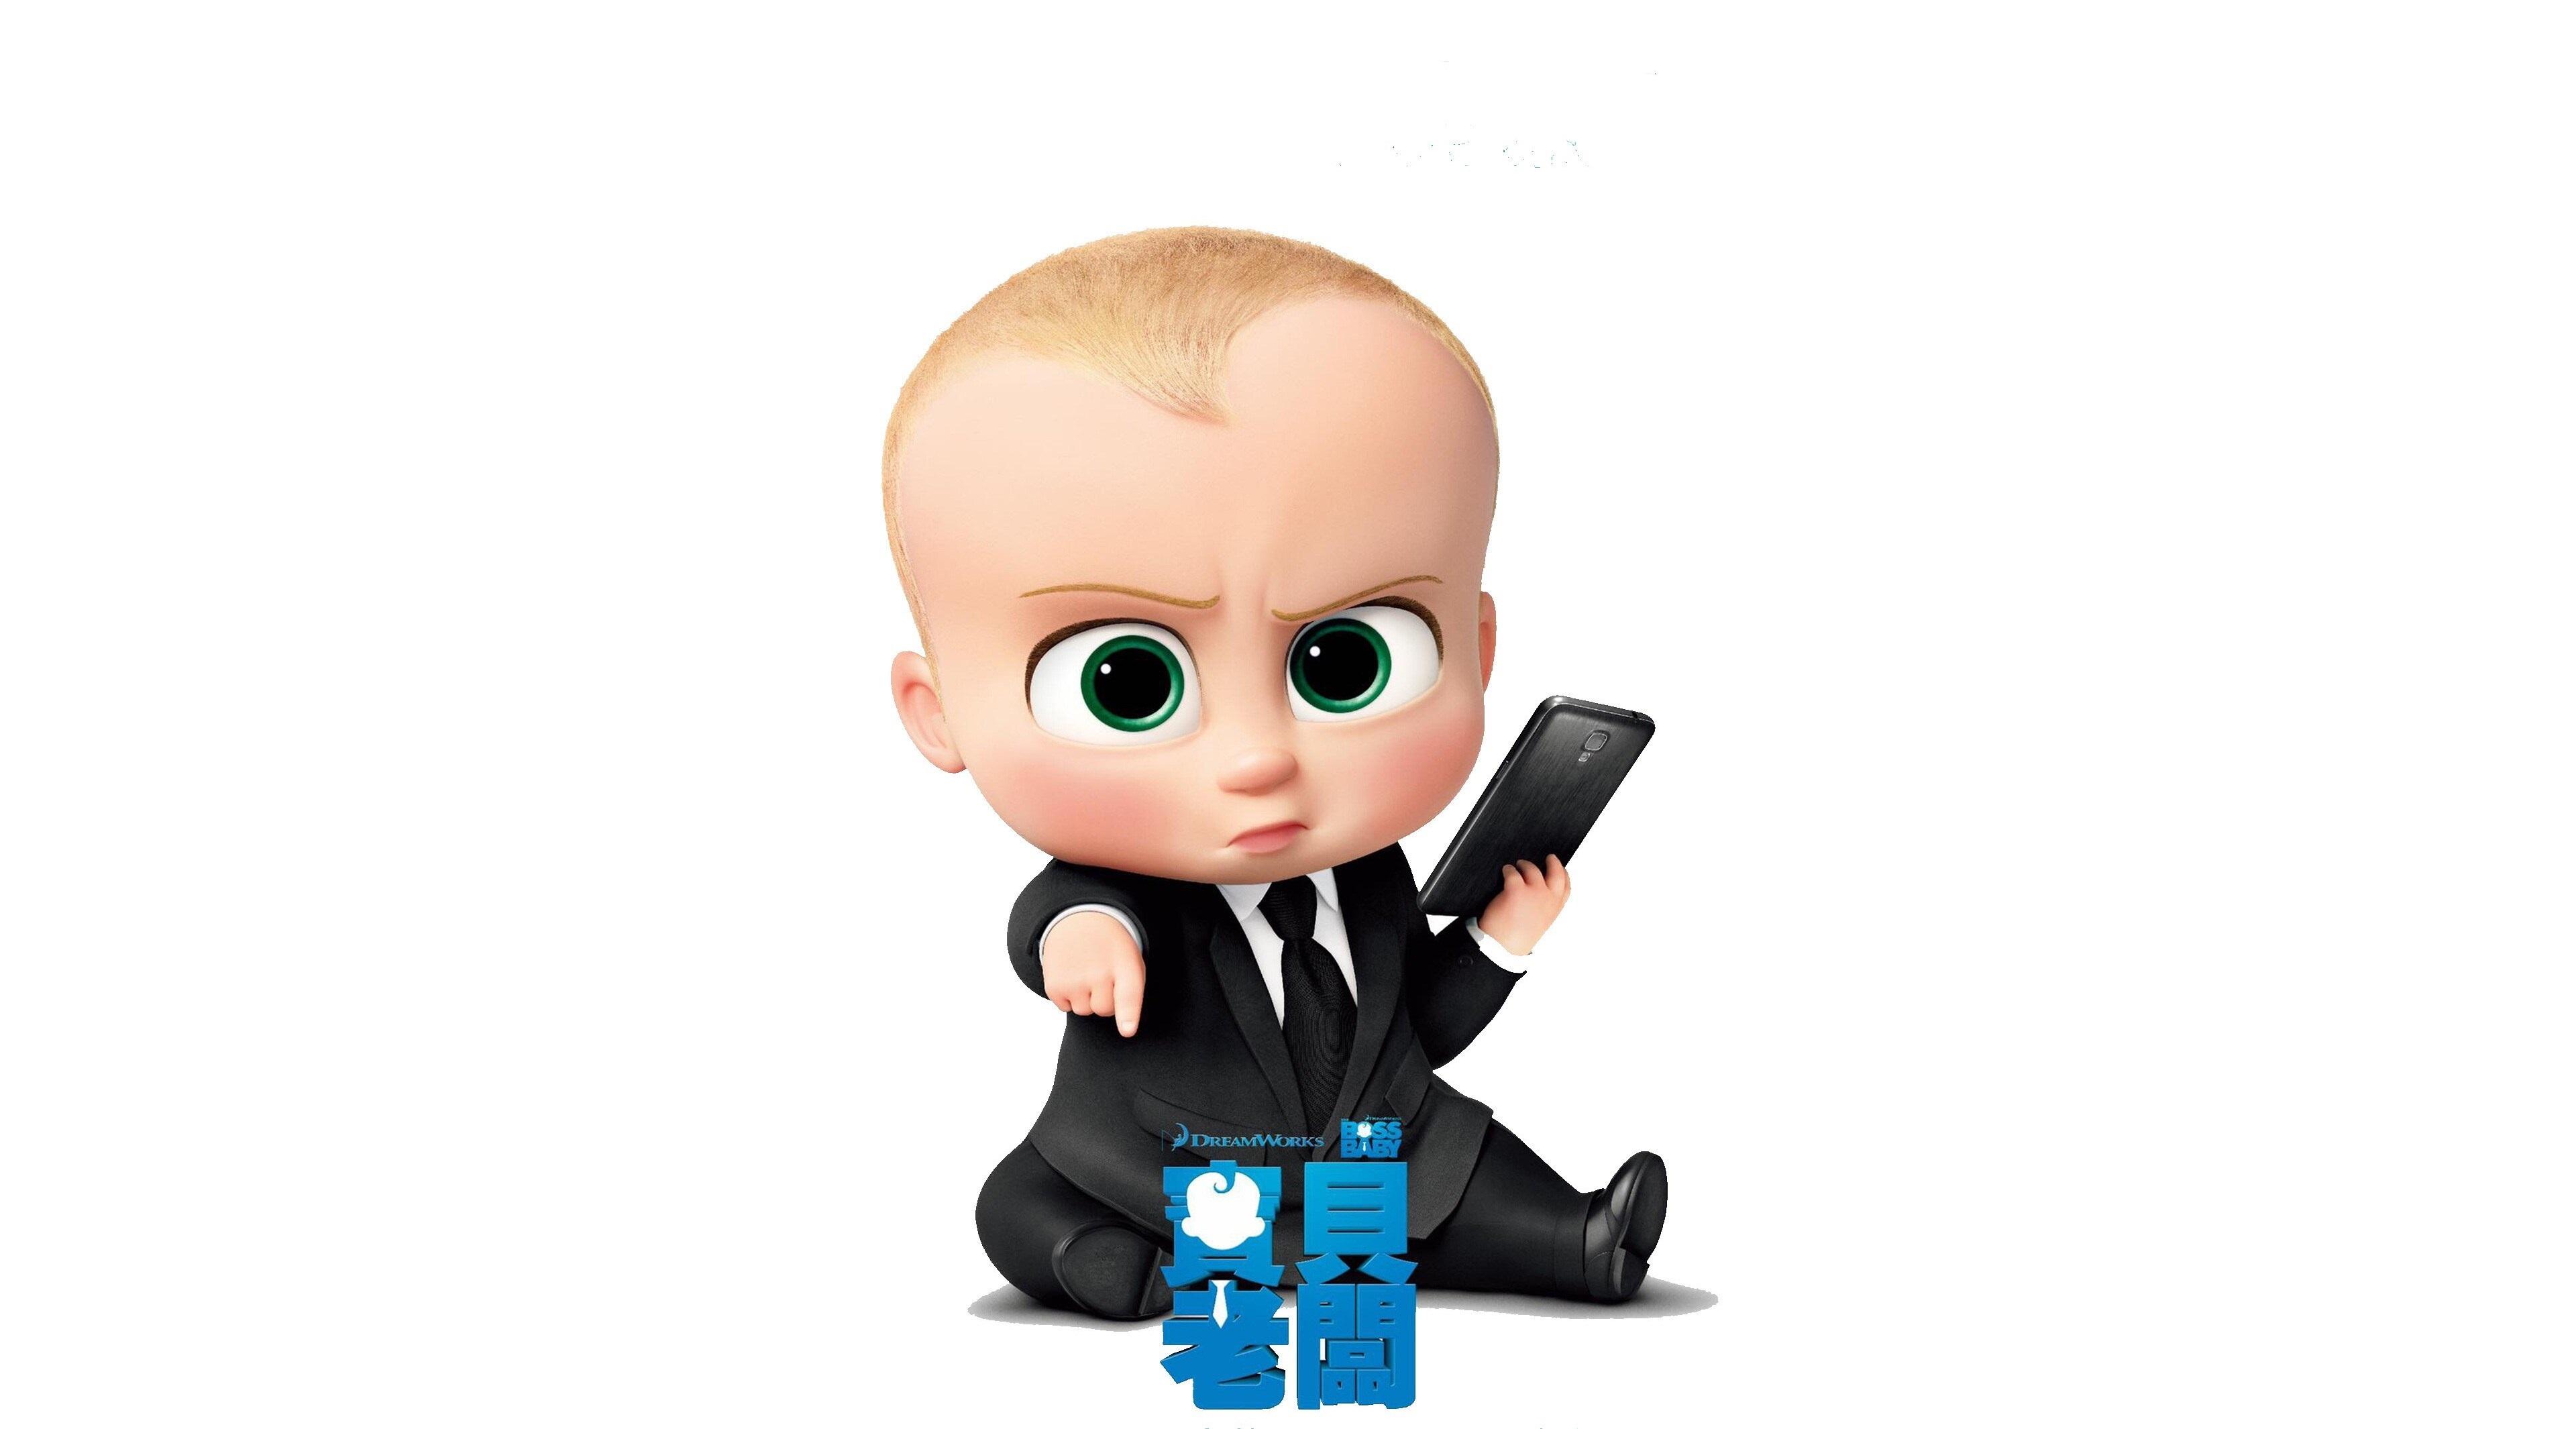 the boss baby 4k wallpaper for pc in HD. Movie